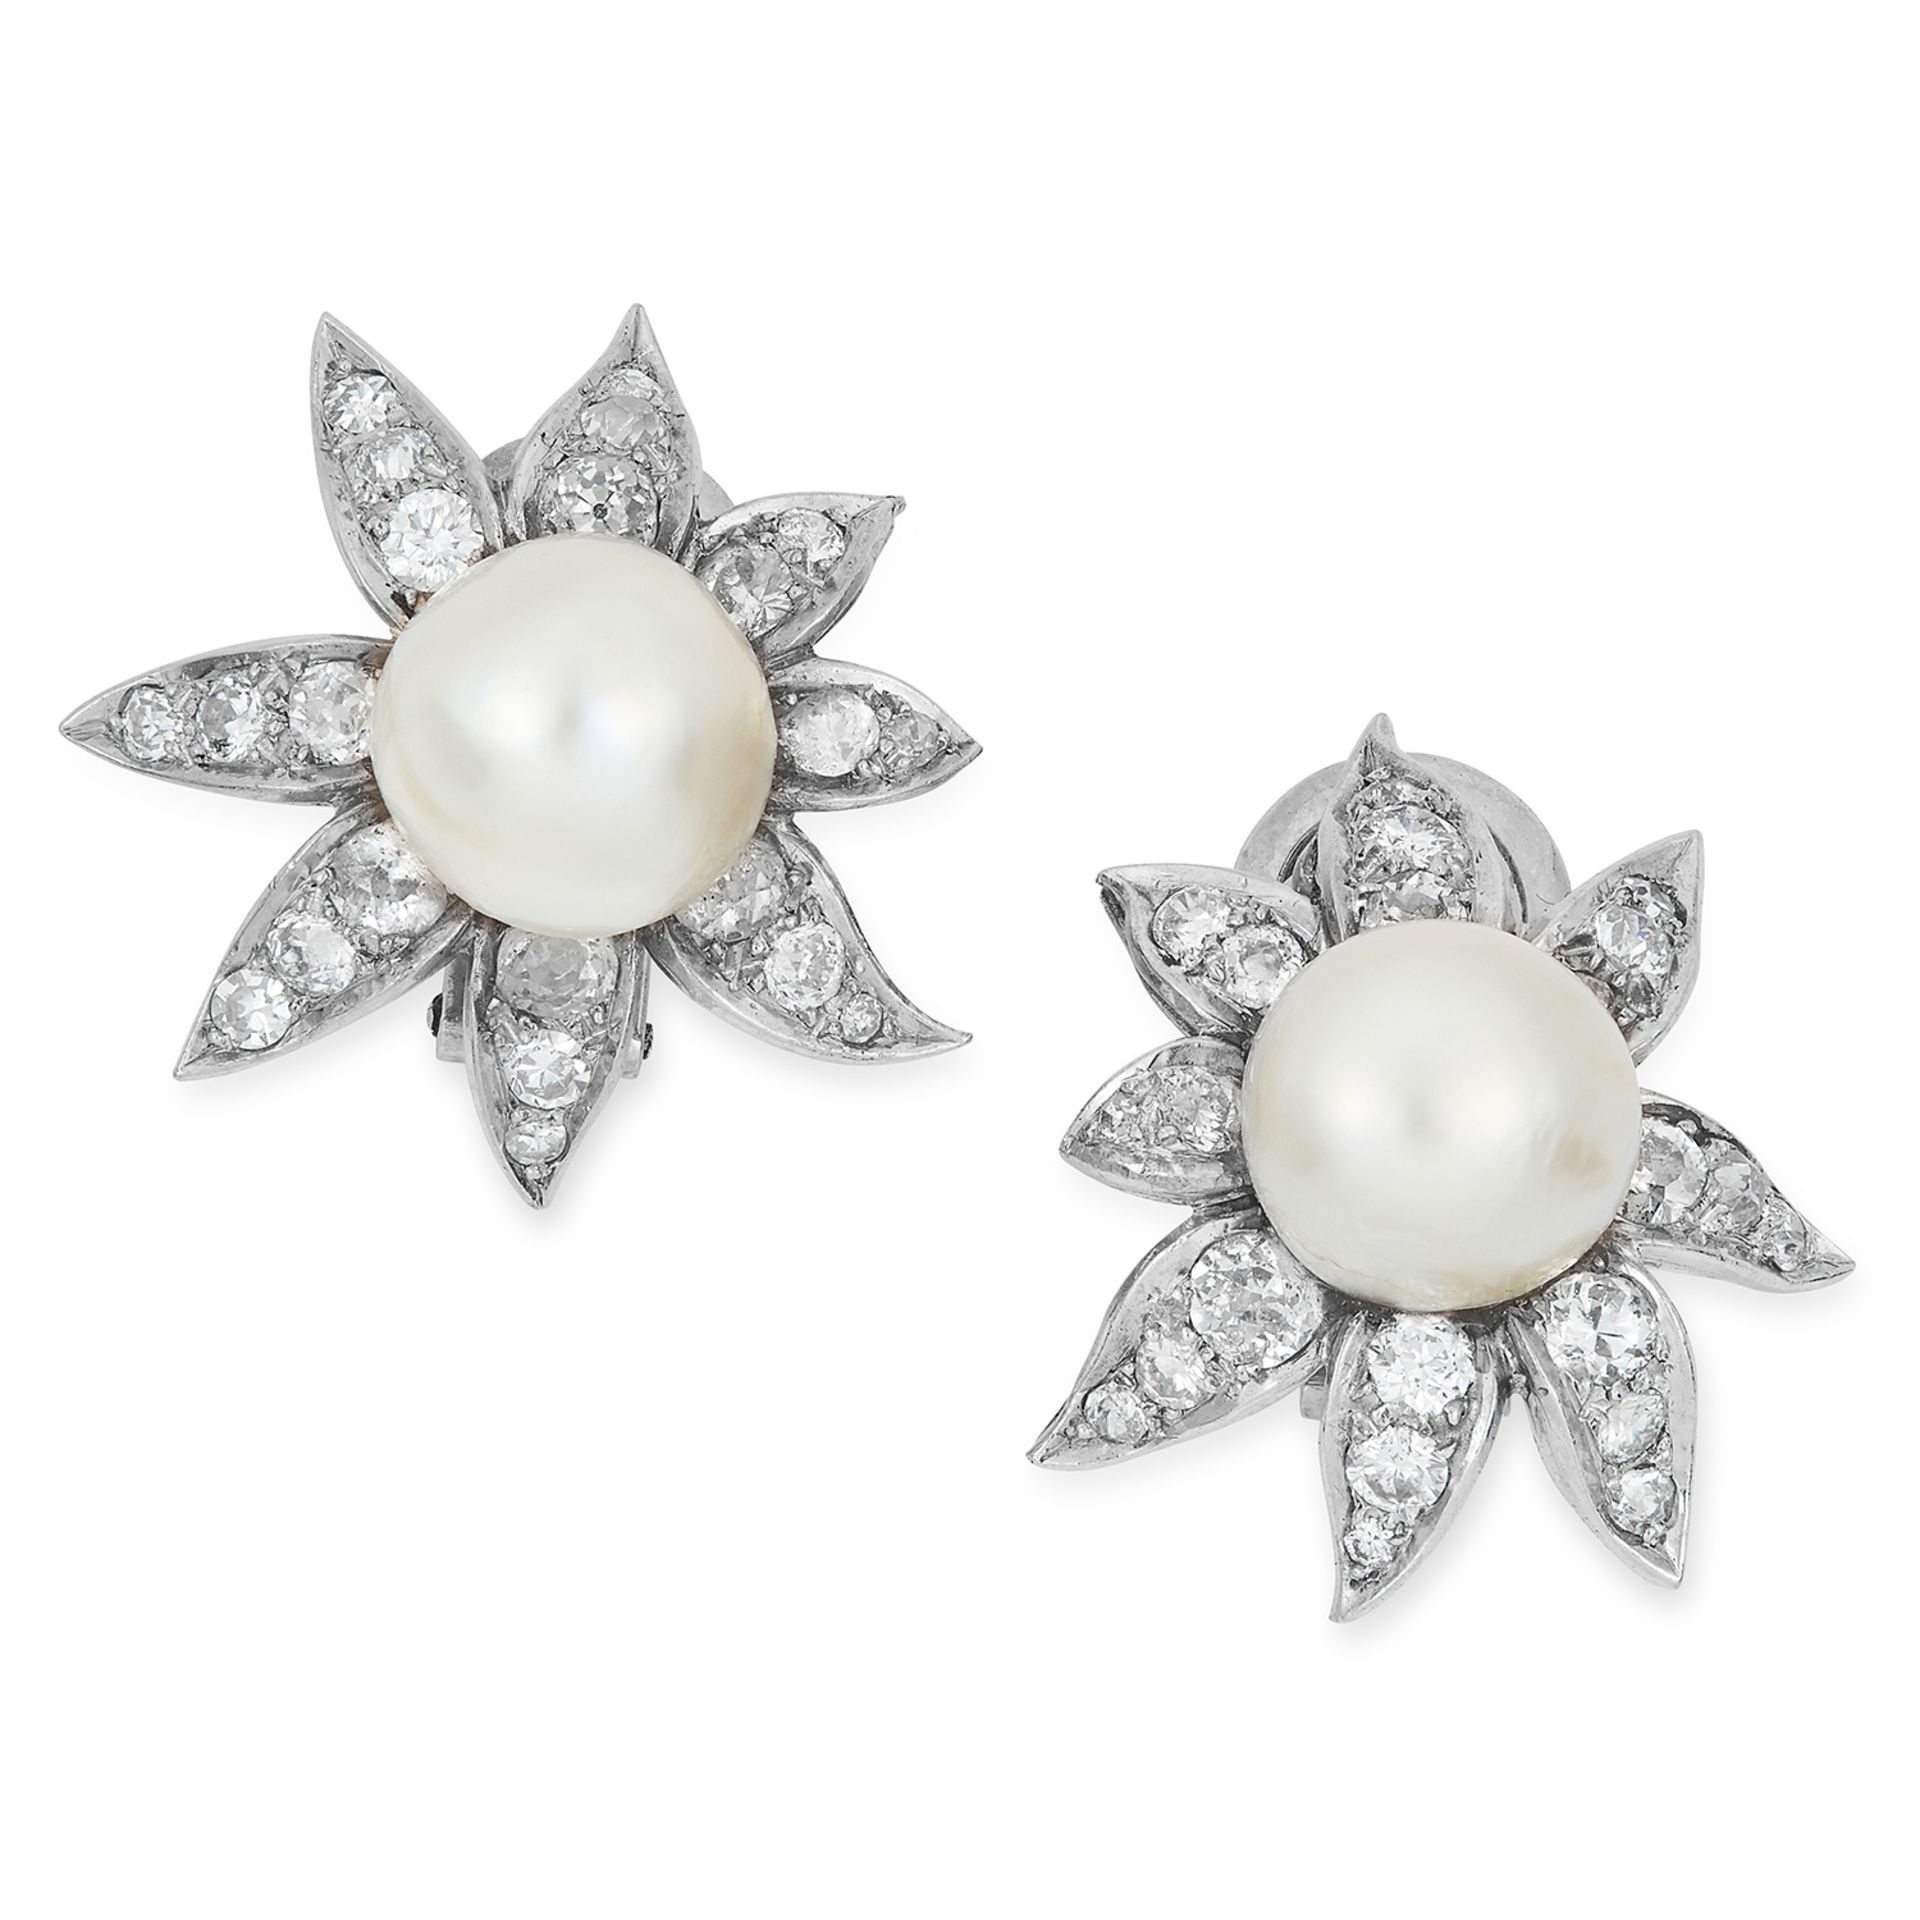 NATURAL SALTWATER PEARL AND DIAMOND EARRINGS formed of a pearl in a cluster of old and round cut